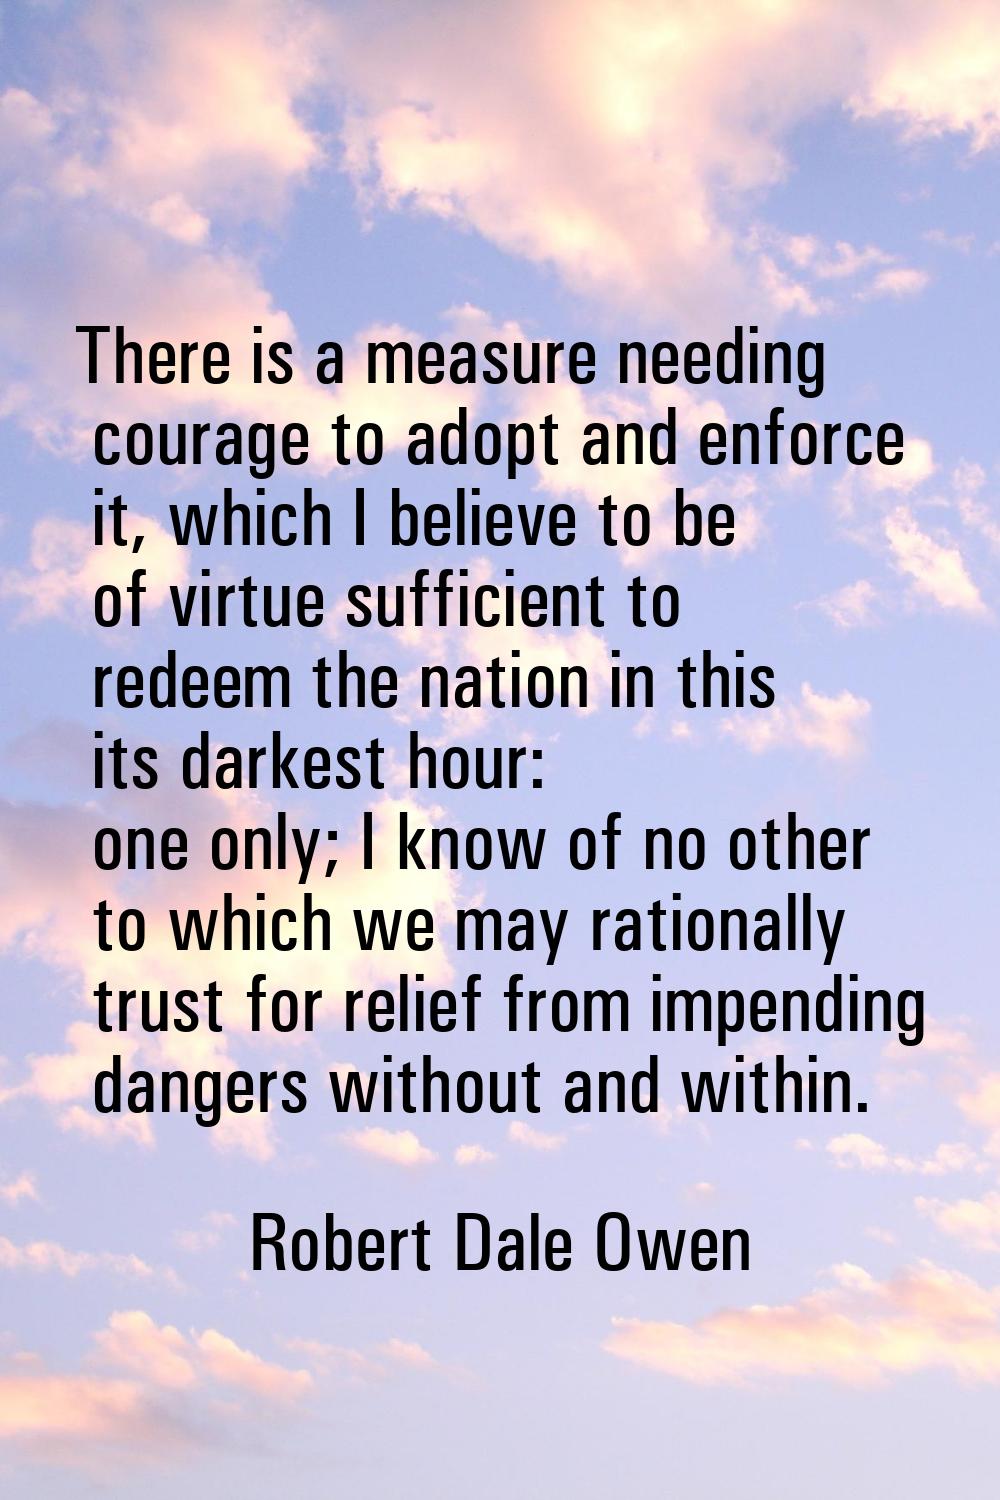 There is a measure needing courage to adopt and enforce it, which I believe to be of virtue suffici